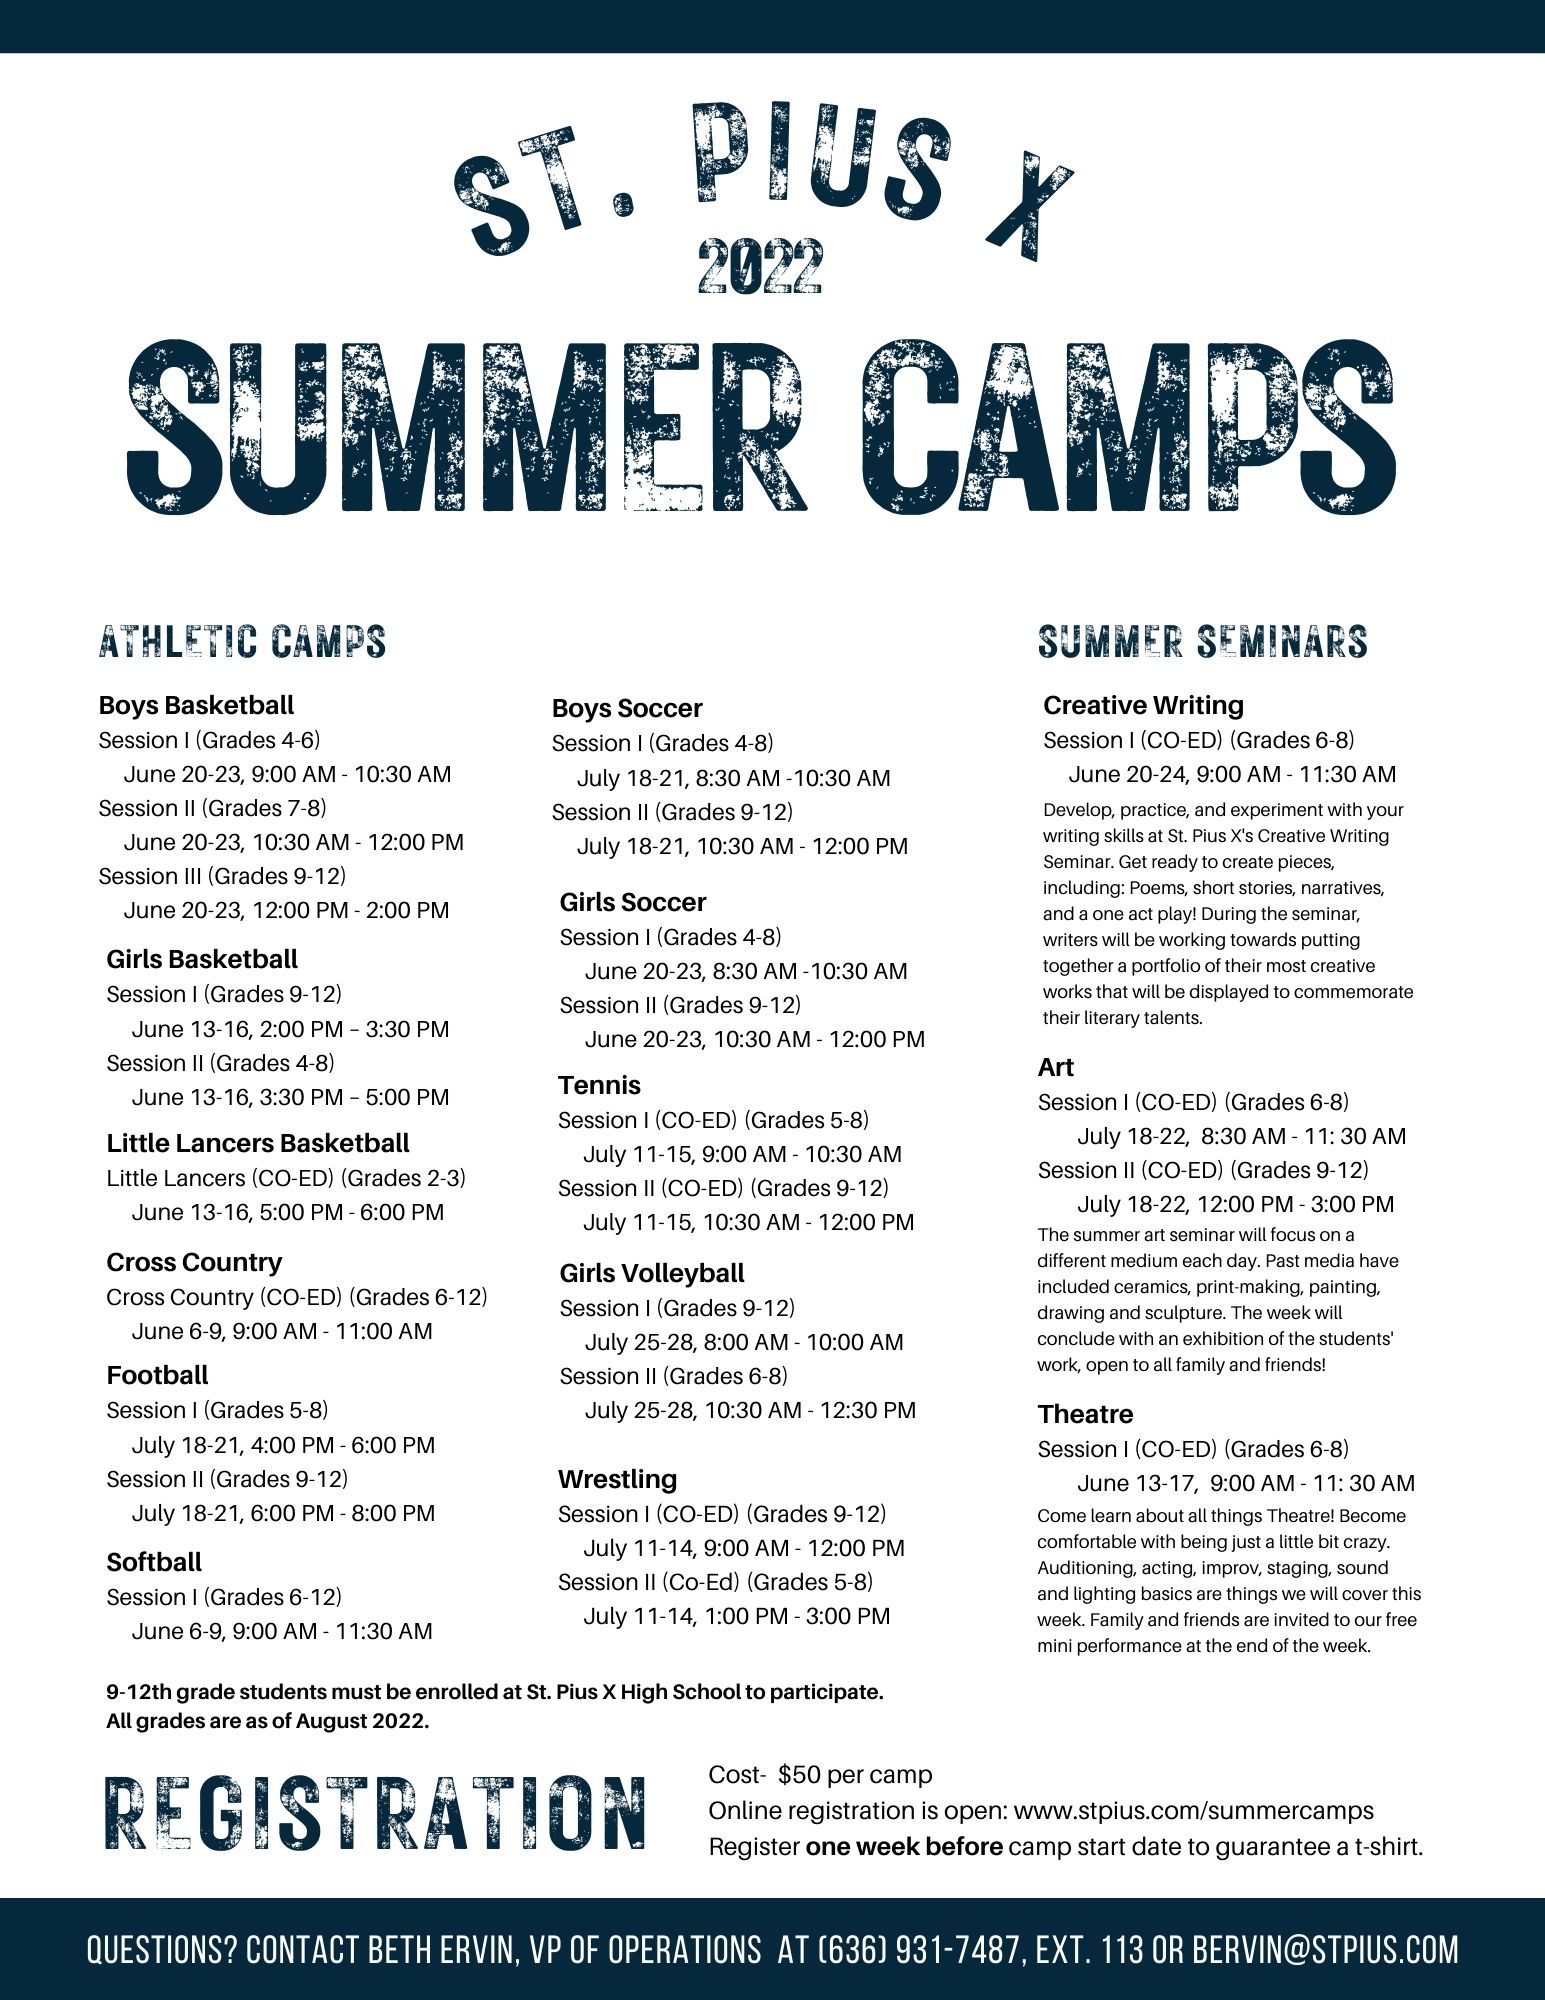 St. Pius X Summer Camps